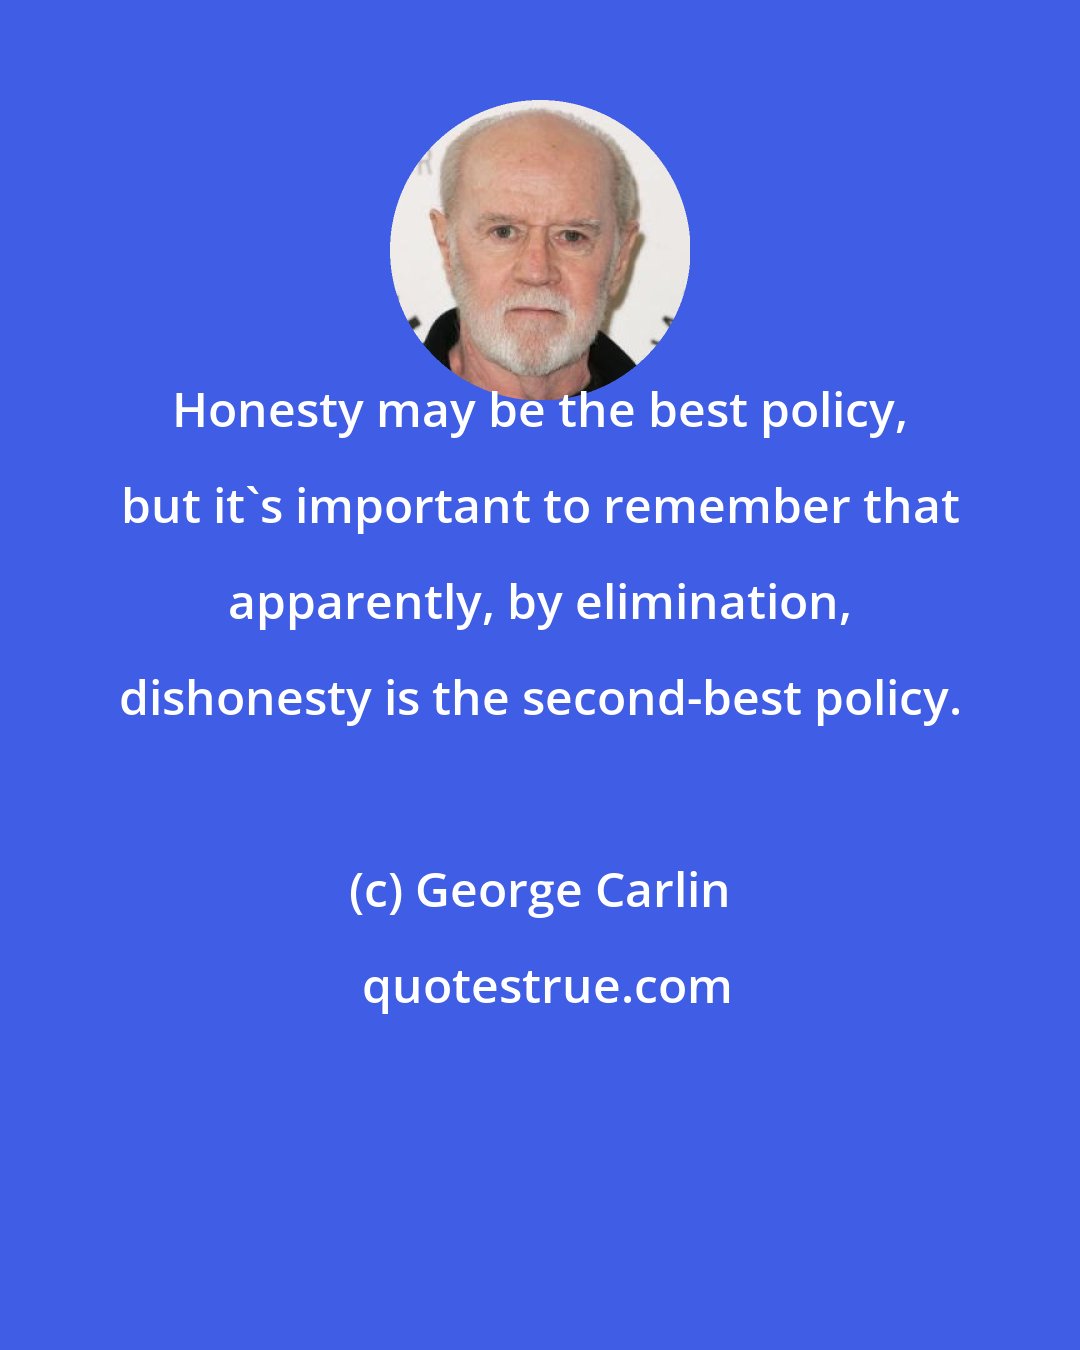 George Carlin: Honesty may be the best policy, but it's important to remember that apparently, by elimination, dishonesty is the second-best policy.